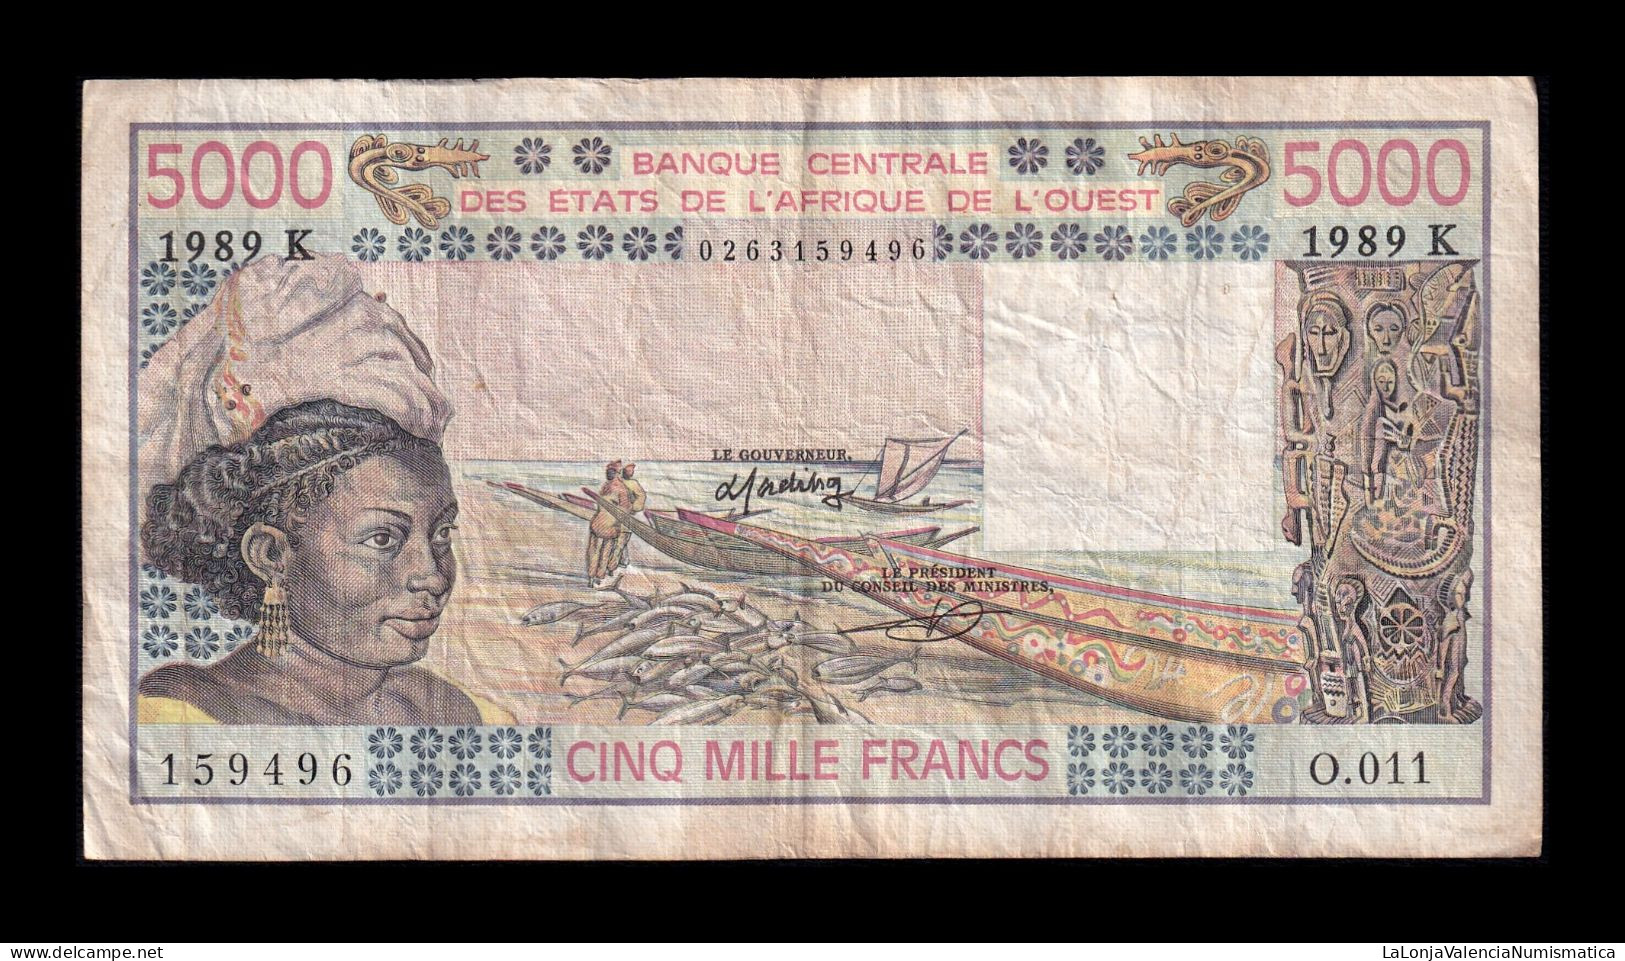 West African St. Senegal 5000 Francs 1989 Pick 708Kd Bc/Mbc F/Vf - Stati Dell'Africa Occidentale